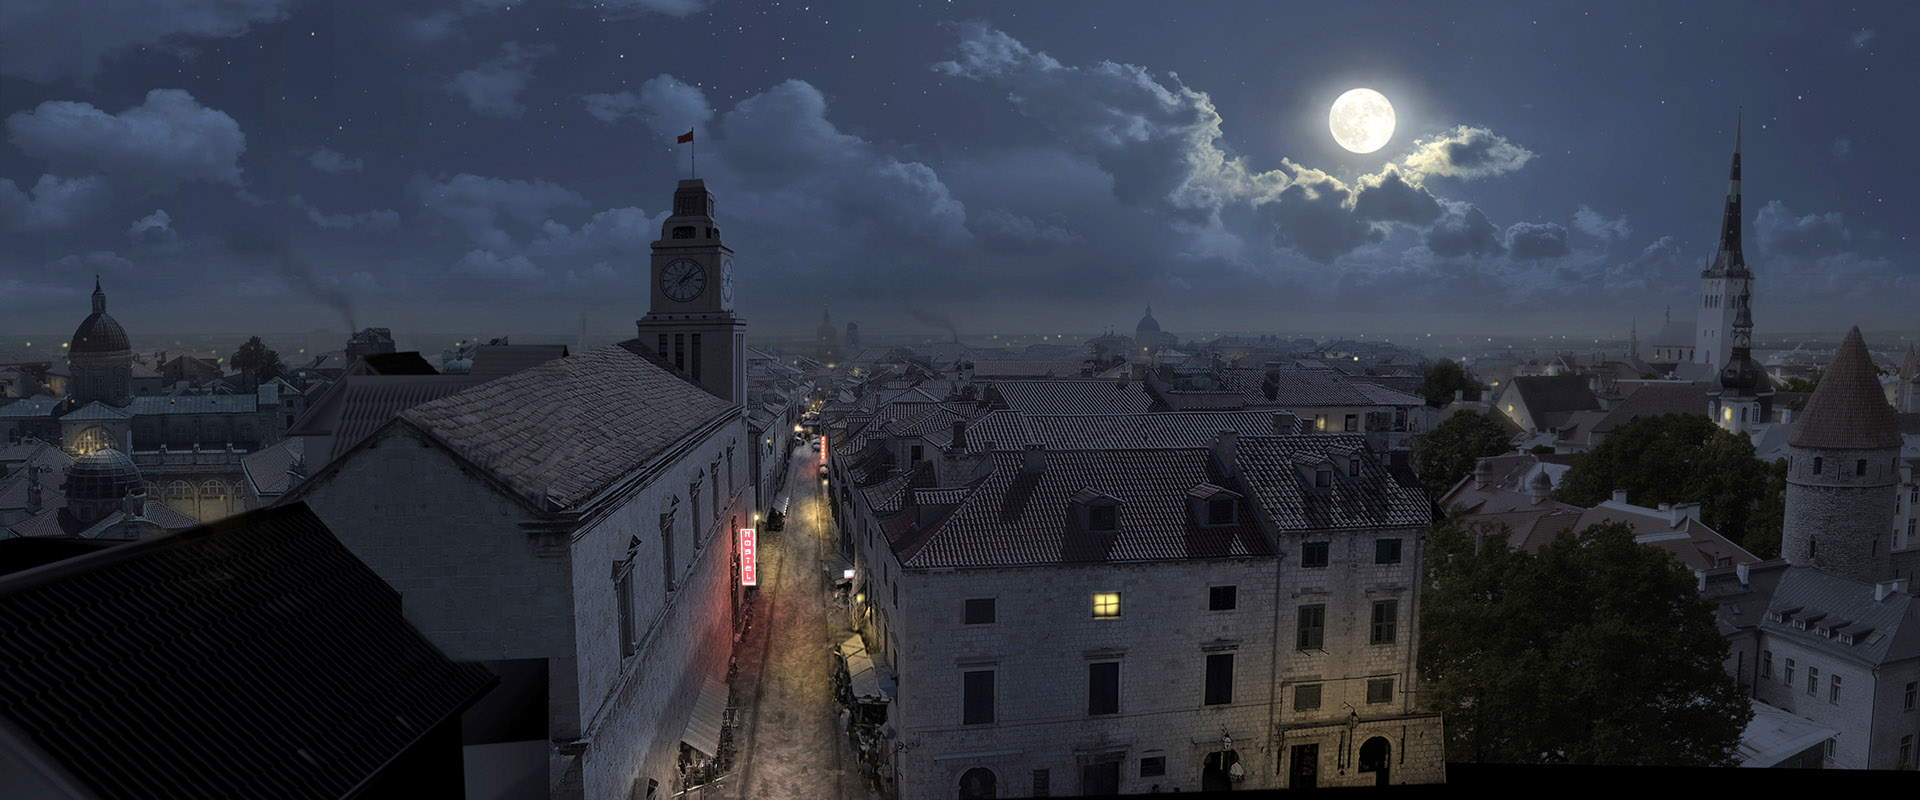 VFX environment of an old town in moon light.